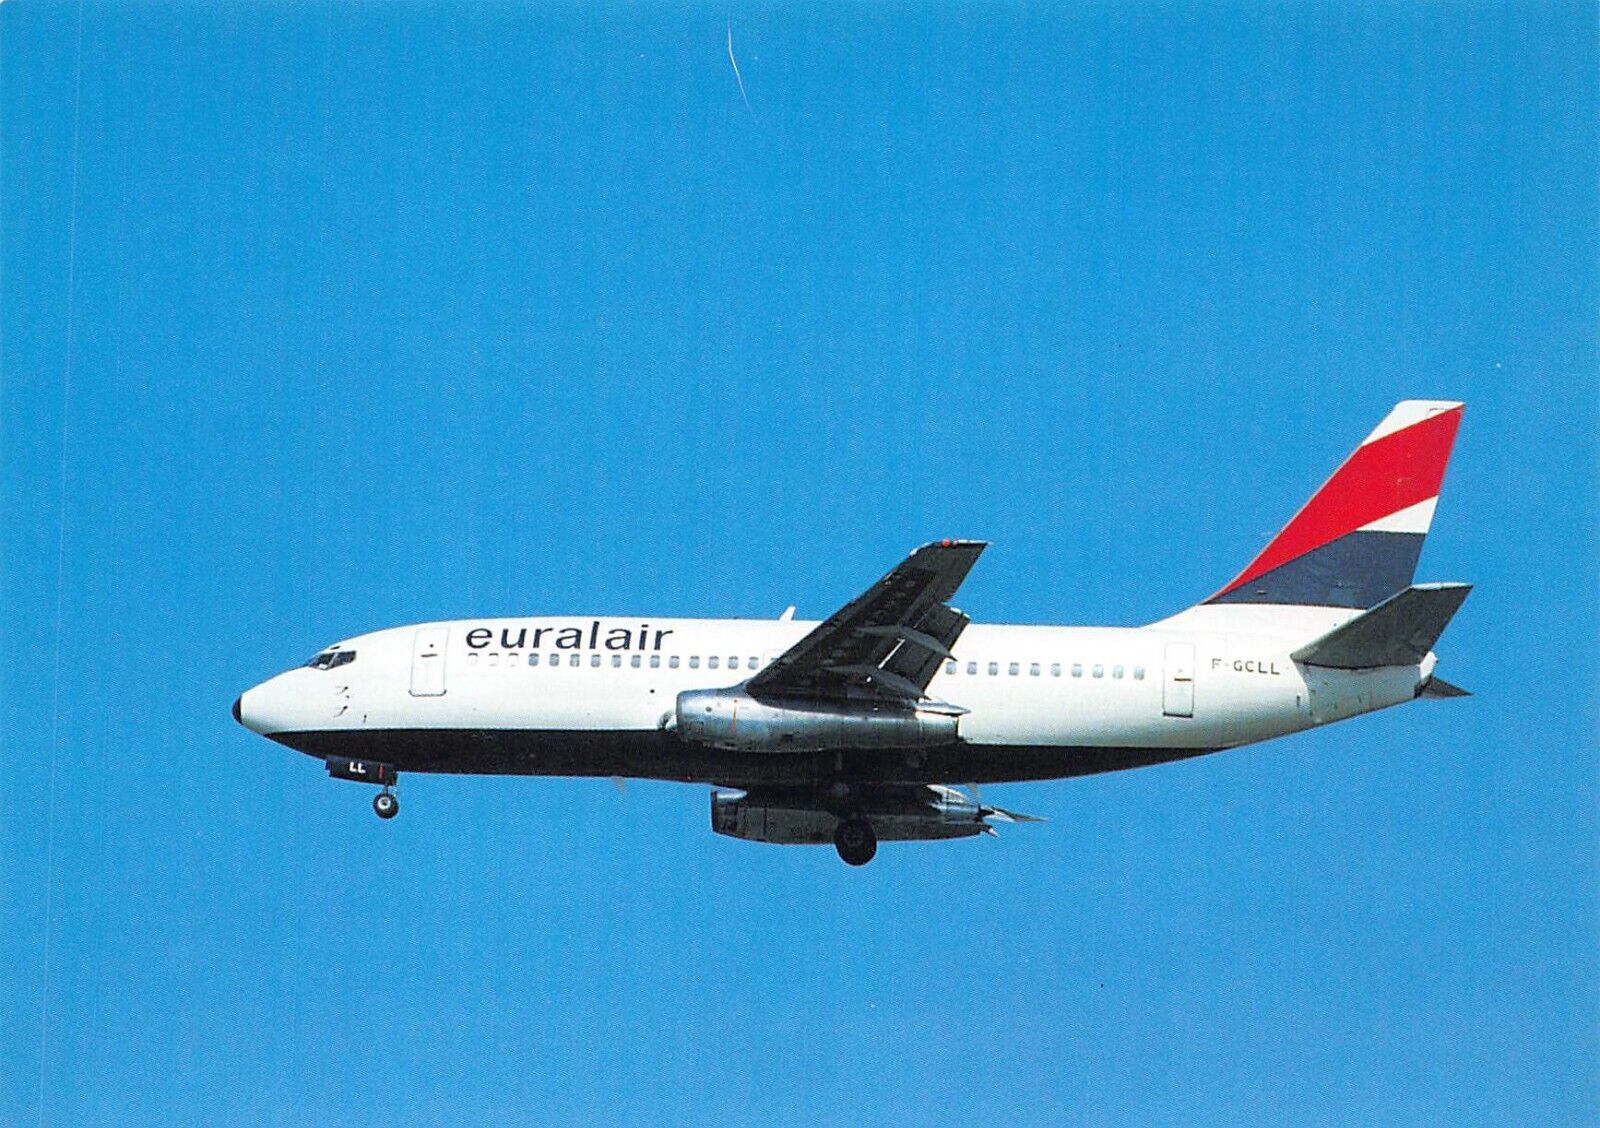 Airline Postcards        EURALAIR    Airlines   Boeing 737-200   F-GCLL